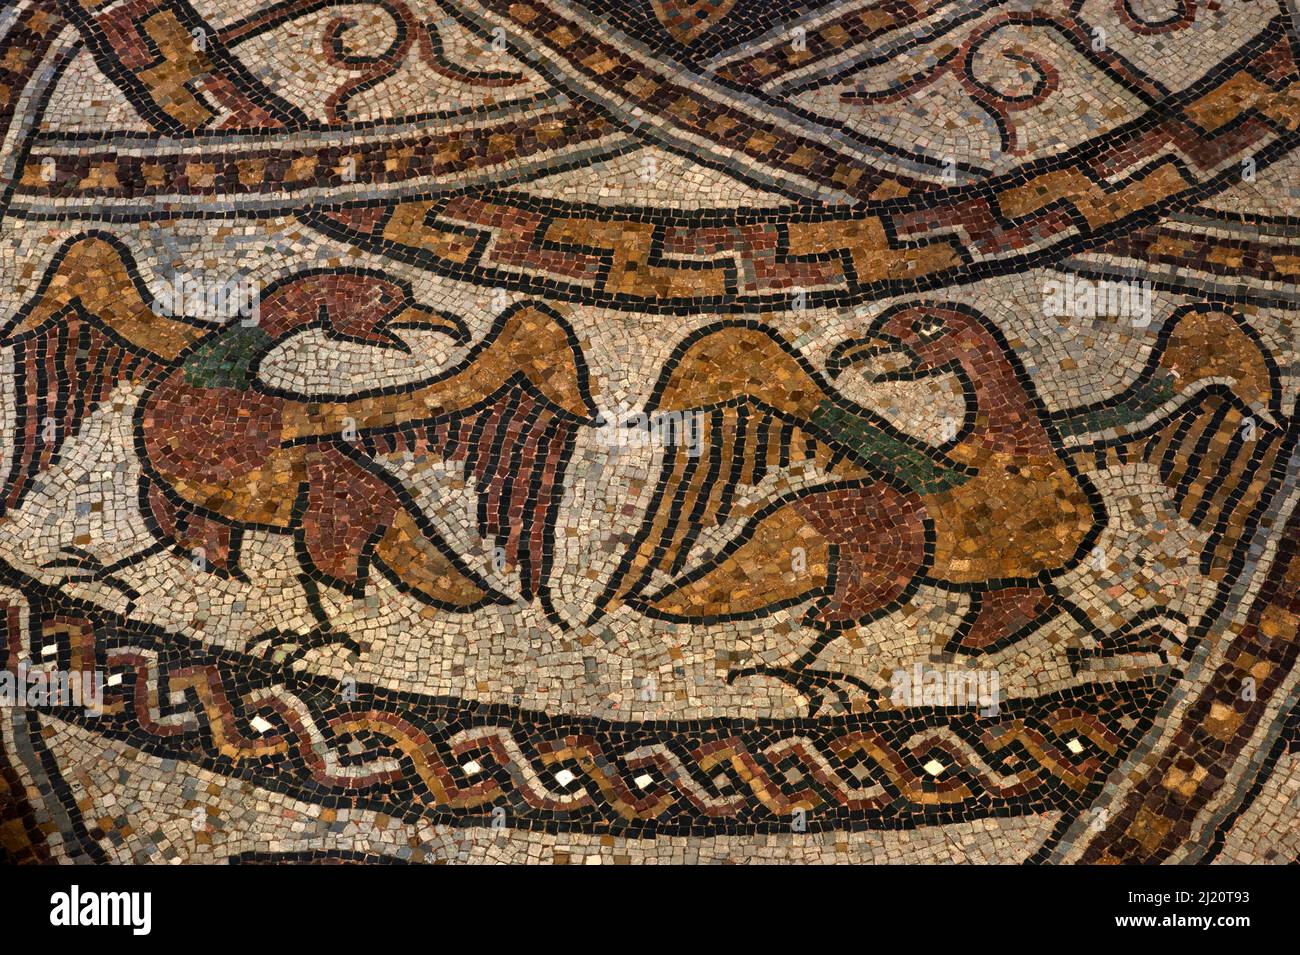 Eagles with outstretched wings and open beaks.  Detail of medieval mosaic in restored late-1000s or early 1100s pavement in former Benedictine abbey church at Sorde l'Abbaye, Landes, Nouvelle-Aquitaine, France. Stock Photo